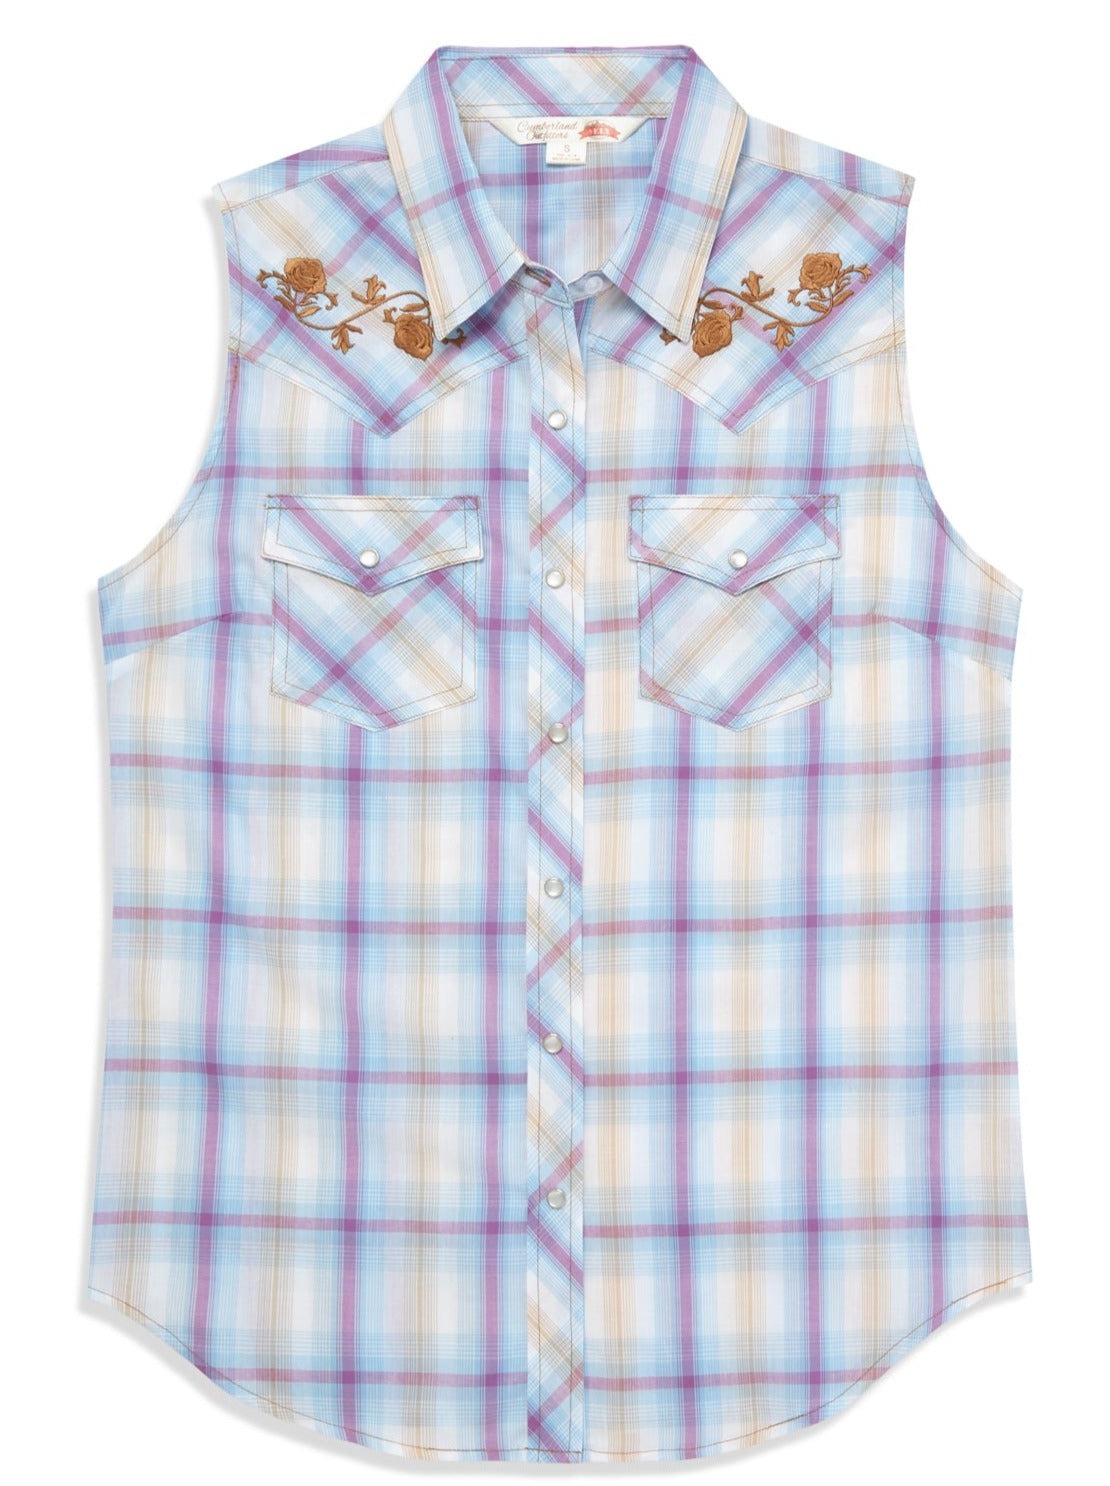 Women's Ely Cattleman Plaid with Floral Embroidery Sleeveless Shirt